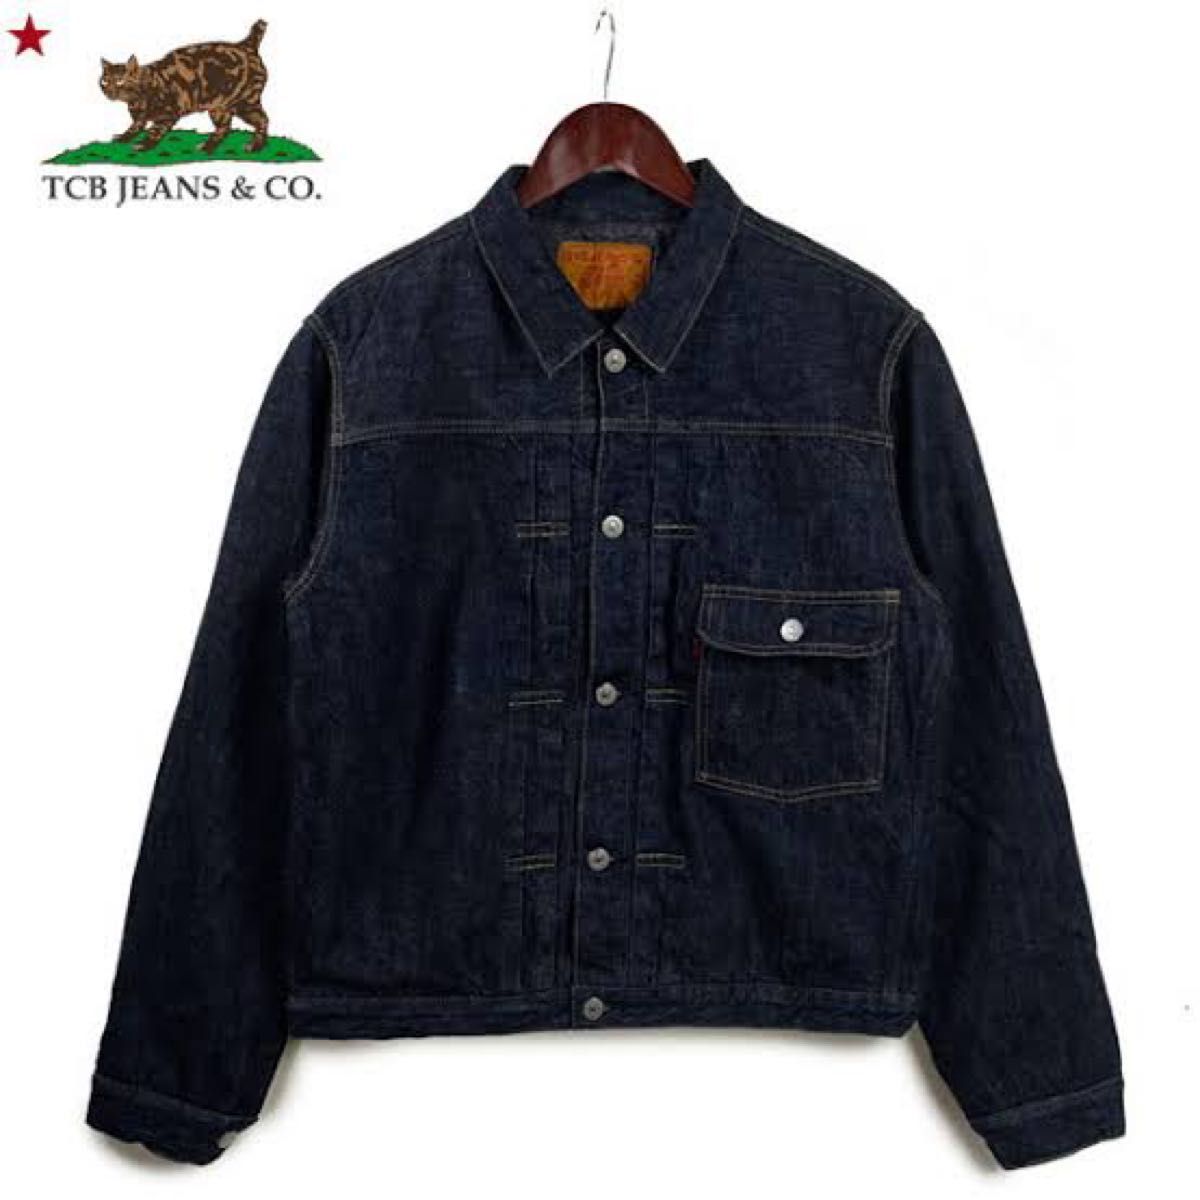 TCB jeans TCBジーンズ 2021AW 限定 Wool Lined Type 1 Jacket ウール